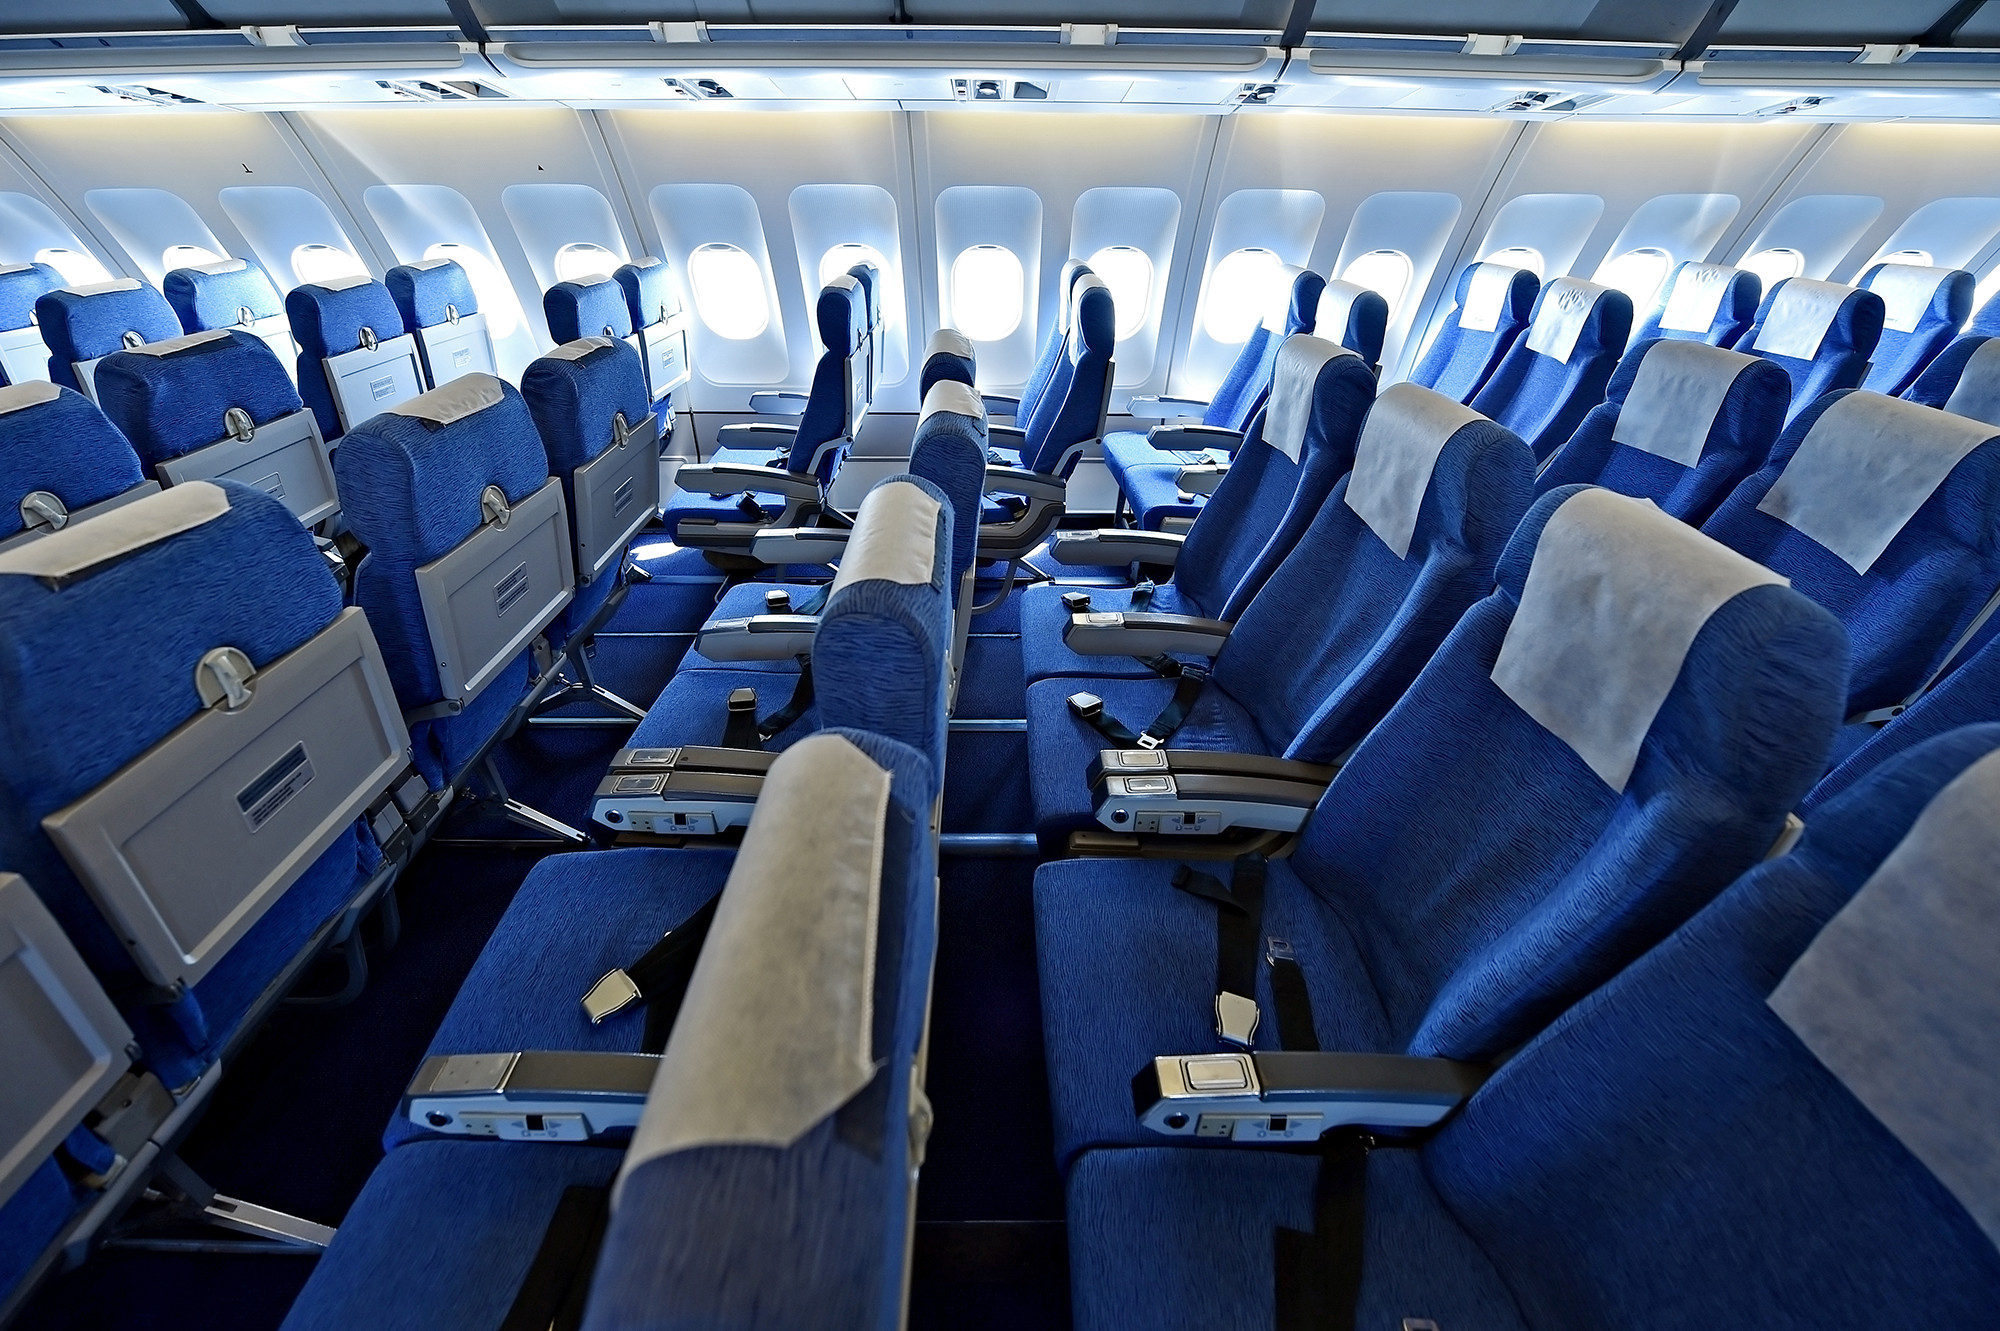 There's a very good reason why airplane seats are blue